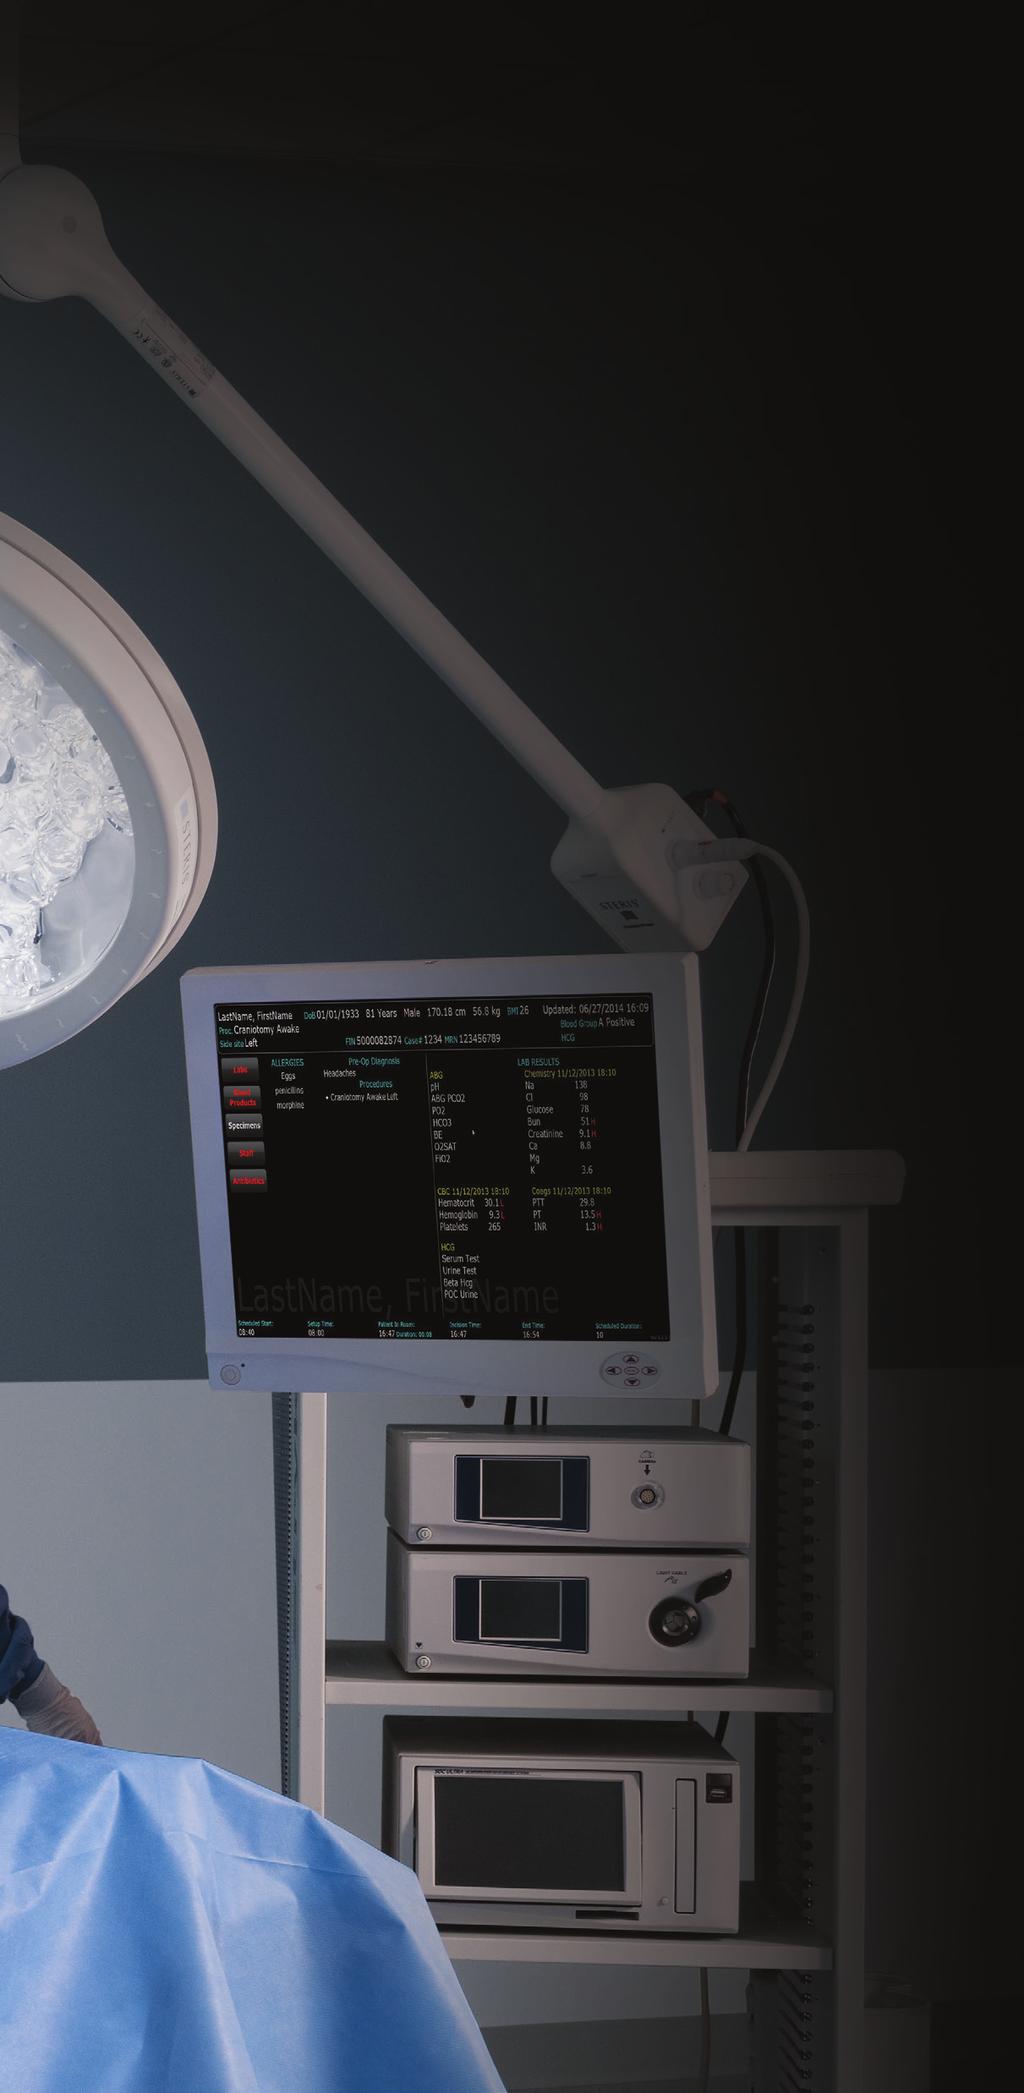 Why white light is ideal in a surgical environment The G-Series uses